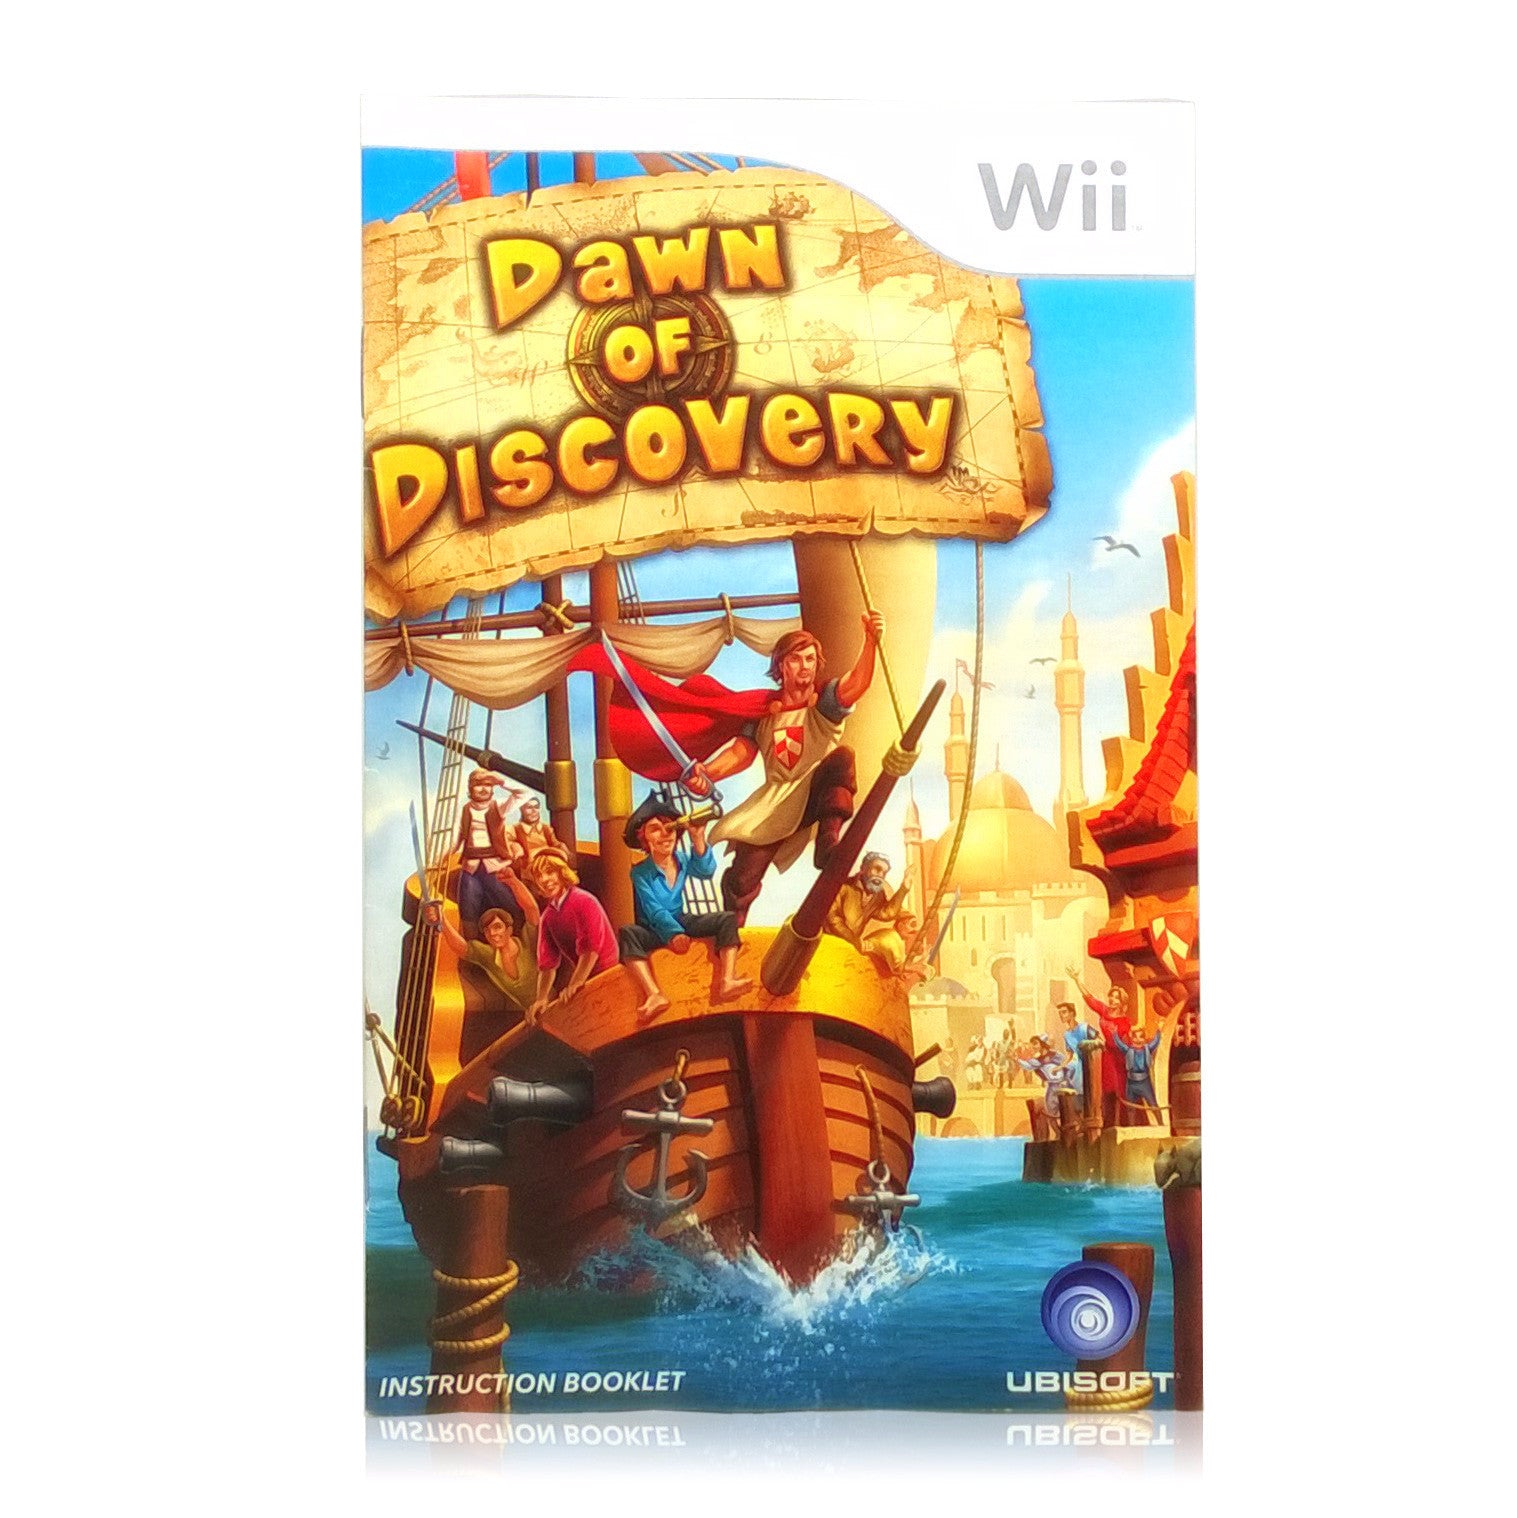 Dawn of Discovery Nintendo Wii Game - Manual